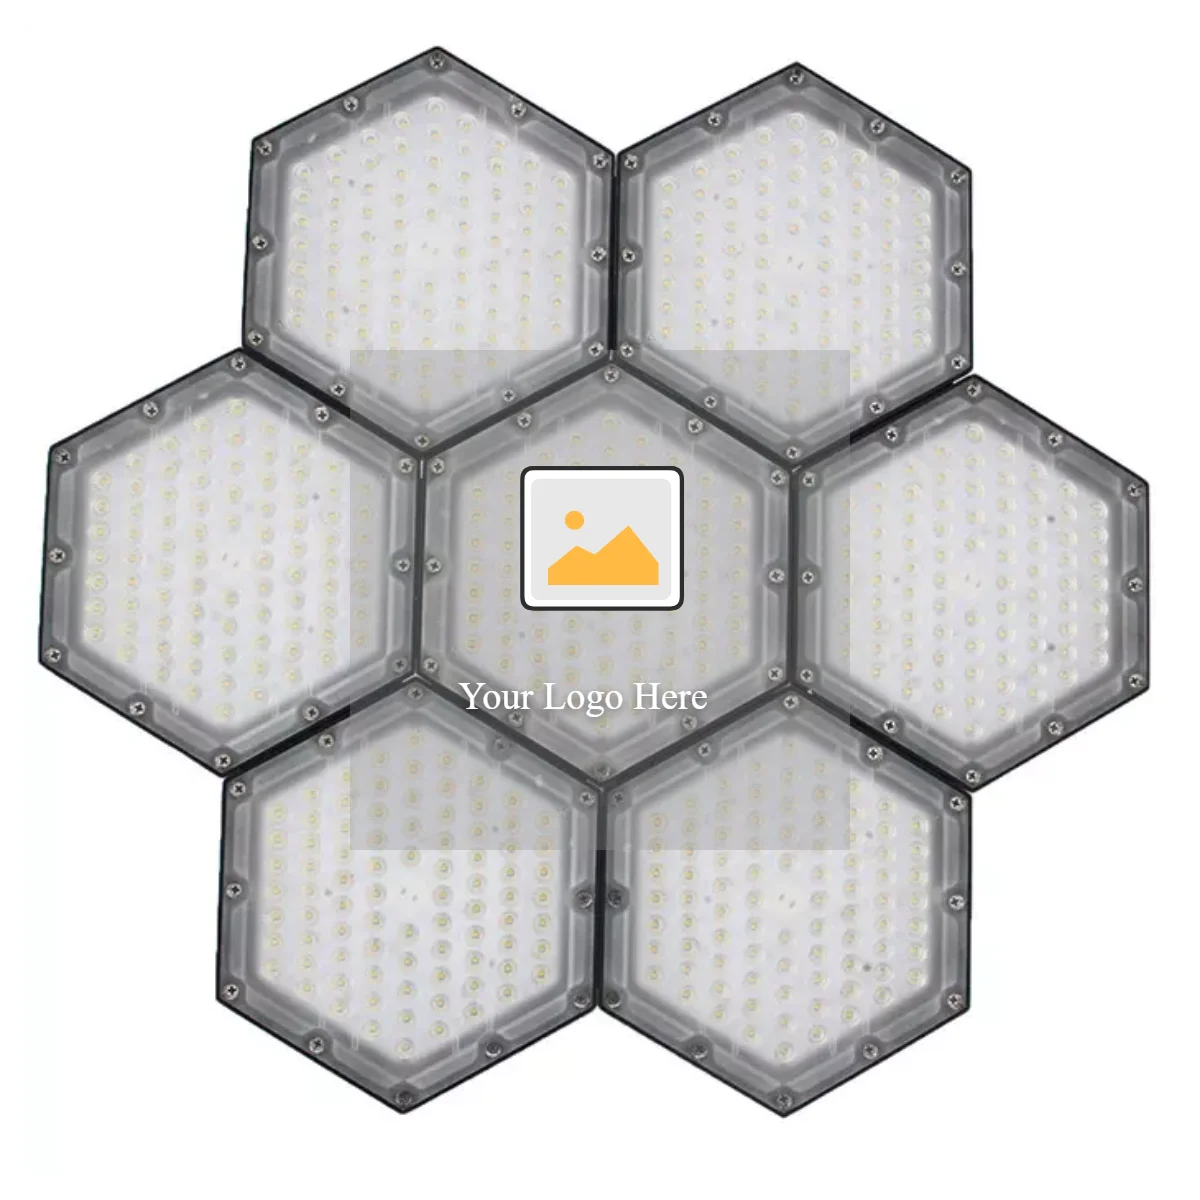 50W to 350W Hexagonal Full Spectrum White LED Grow Lights connect together 